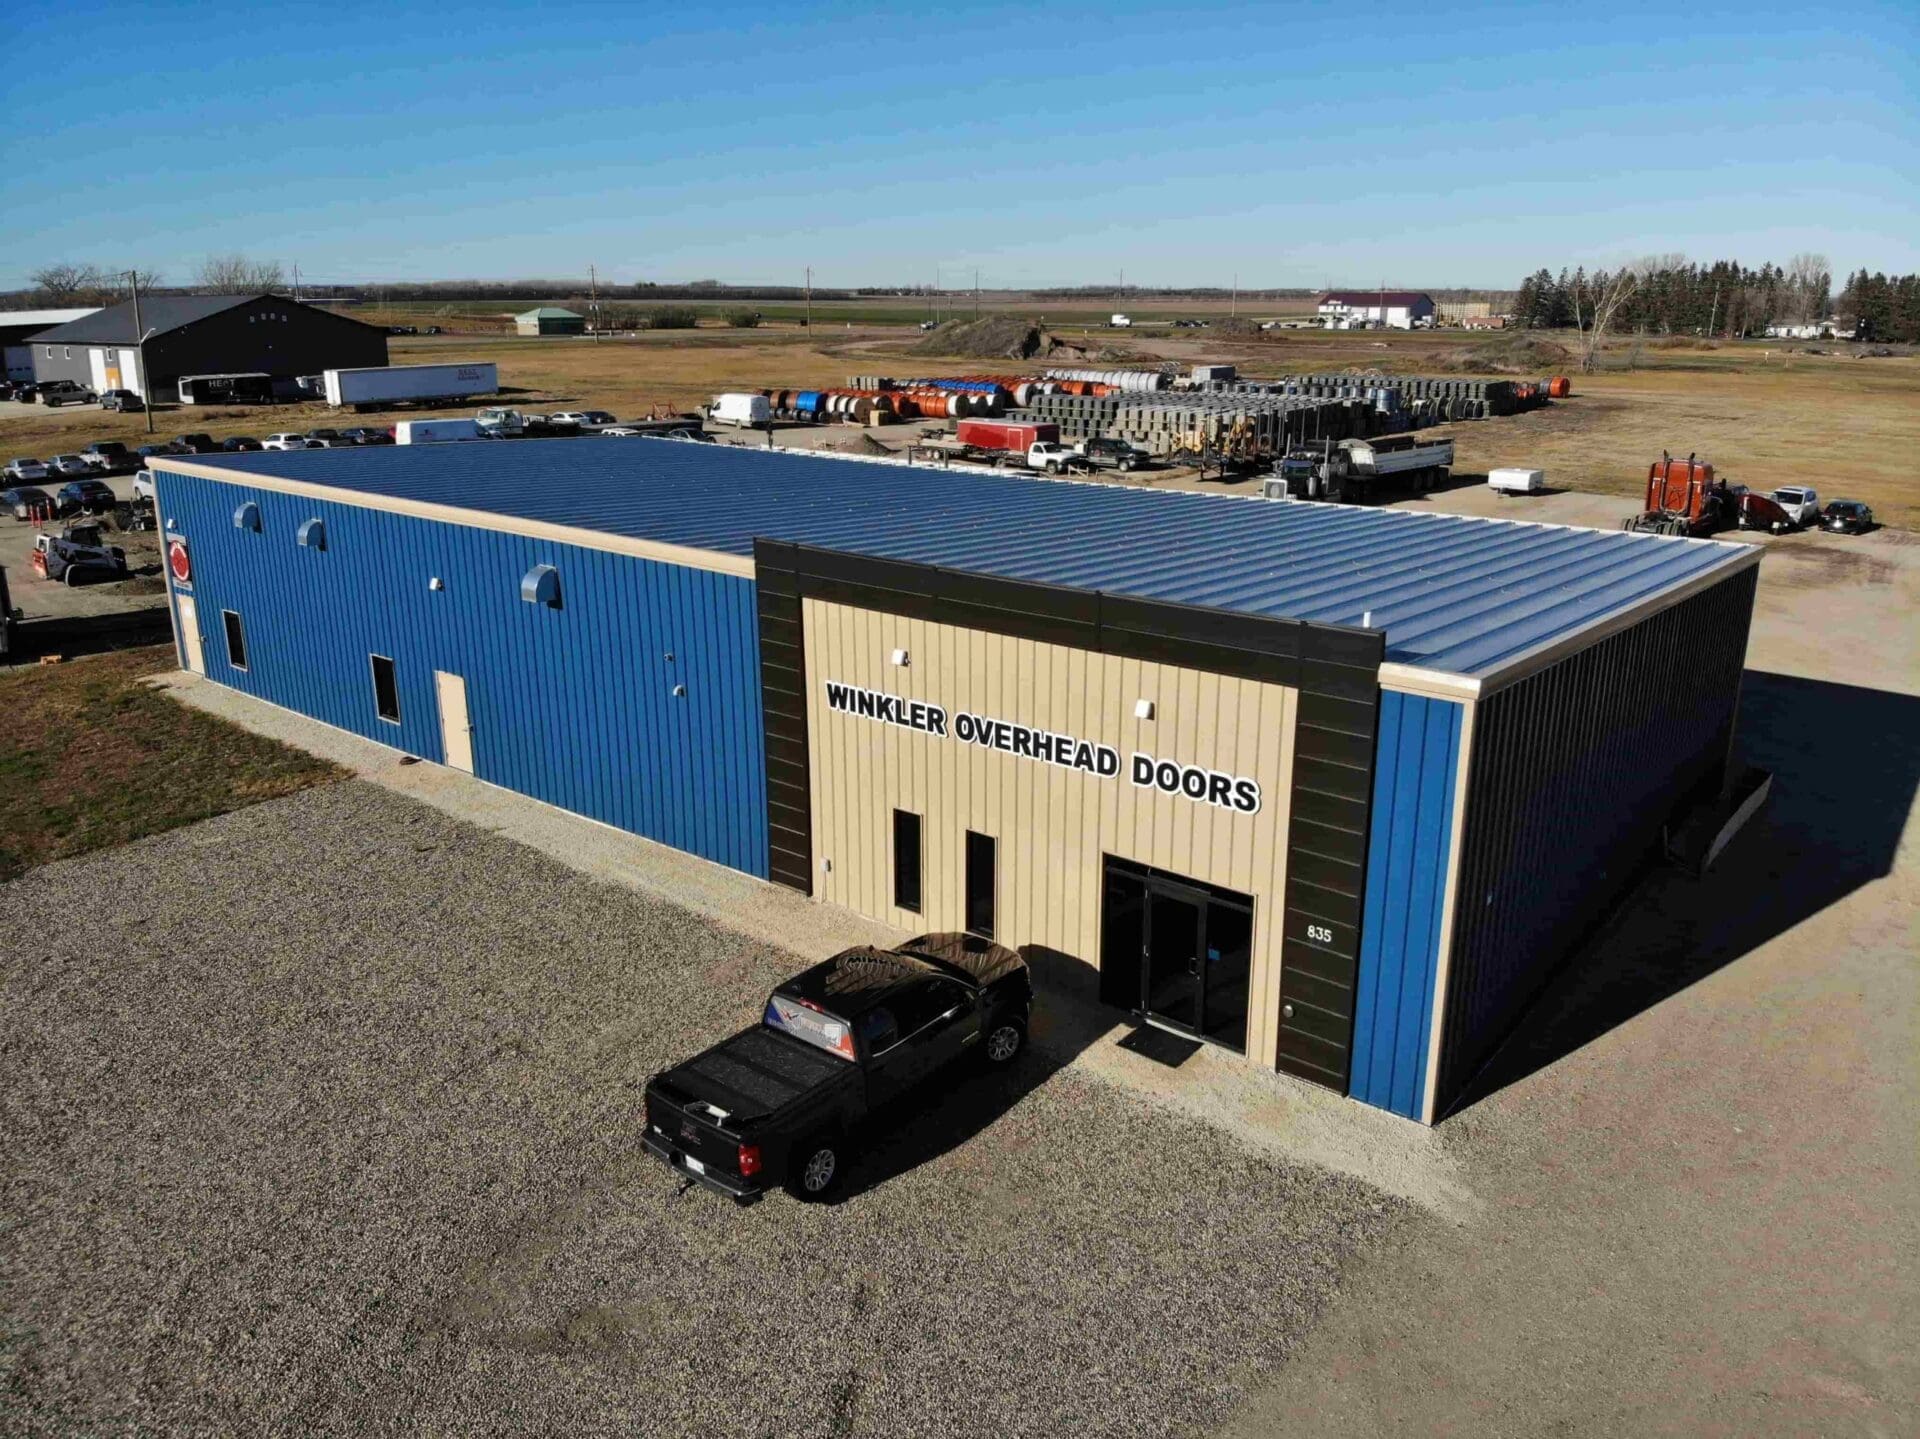 Blue Commercial building with gates and trucks Winkler Overhead Doors and black car